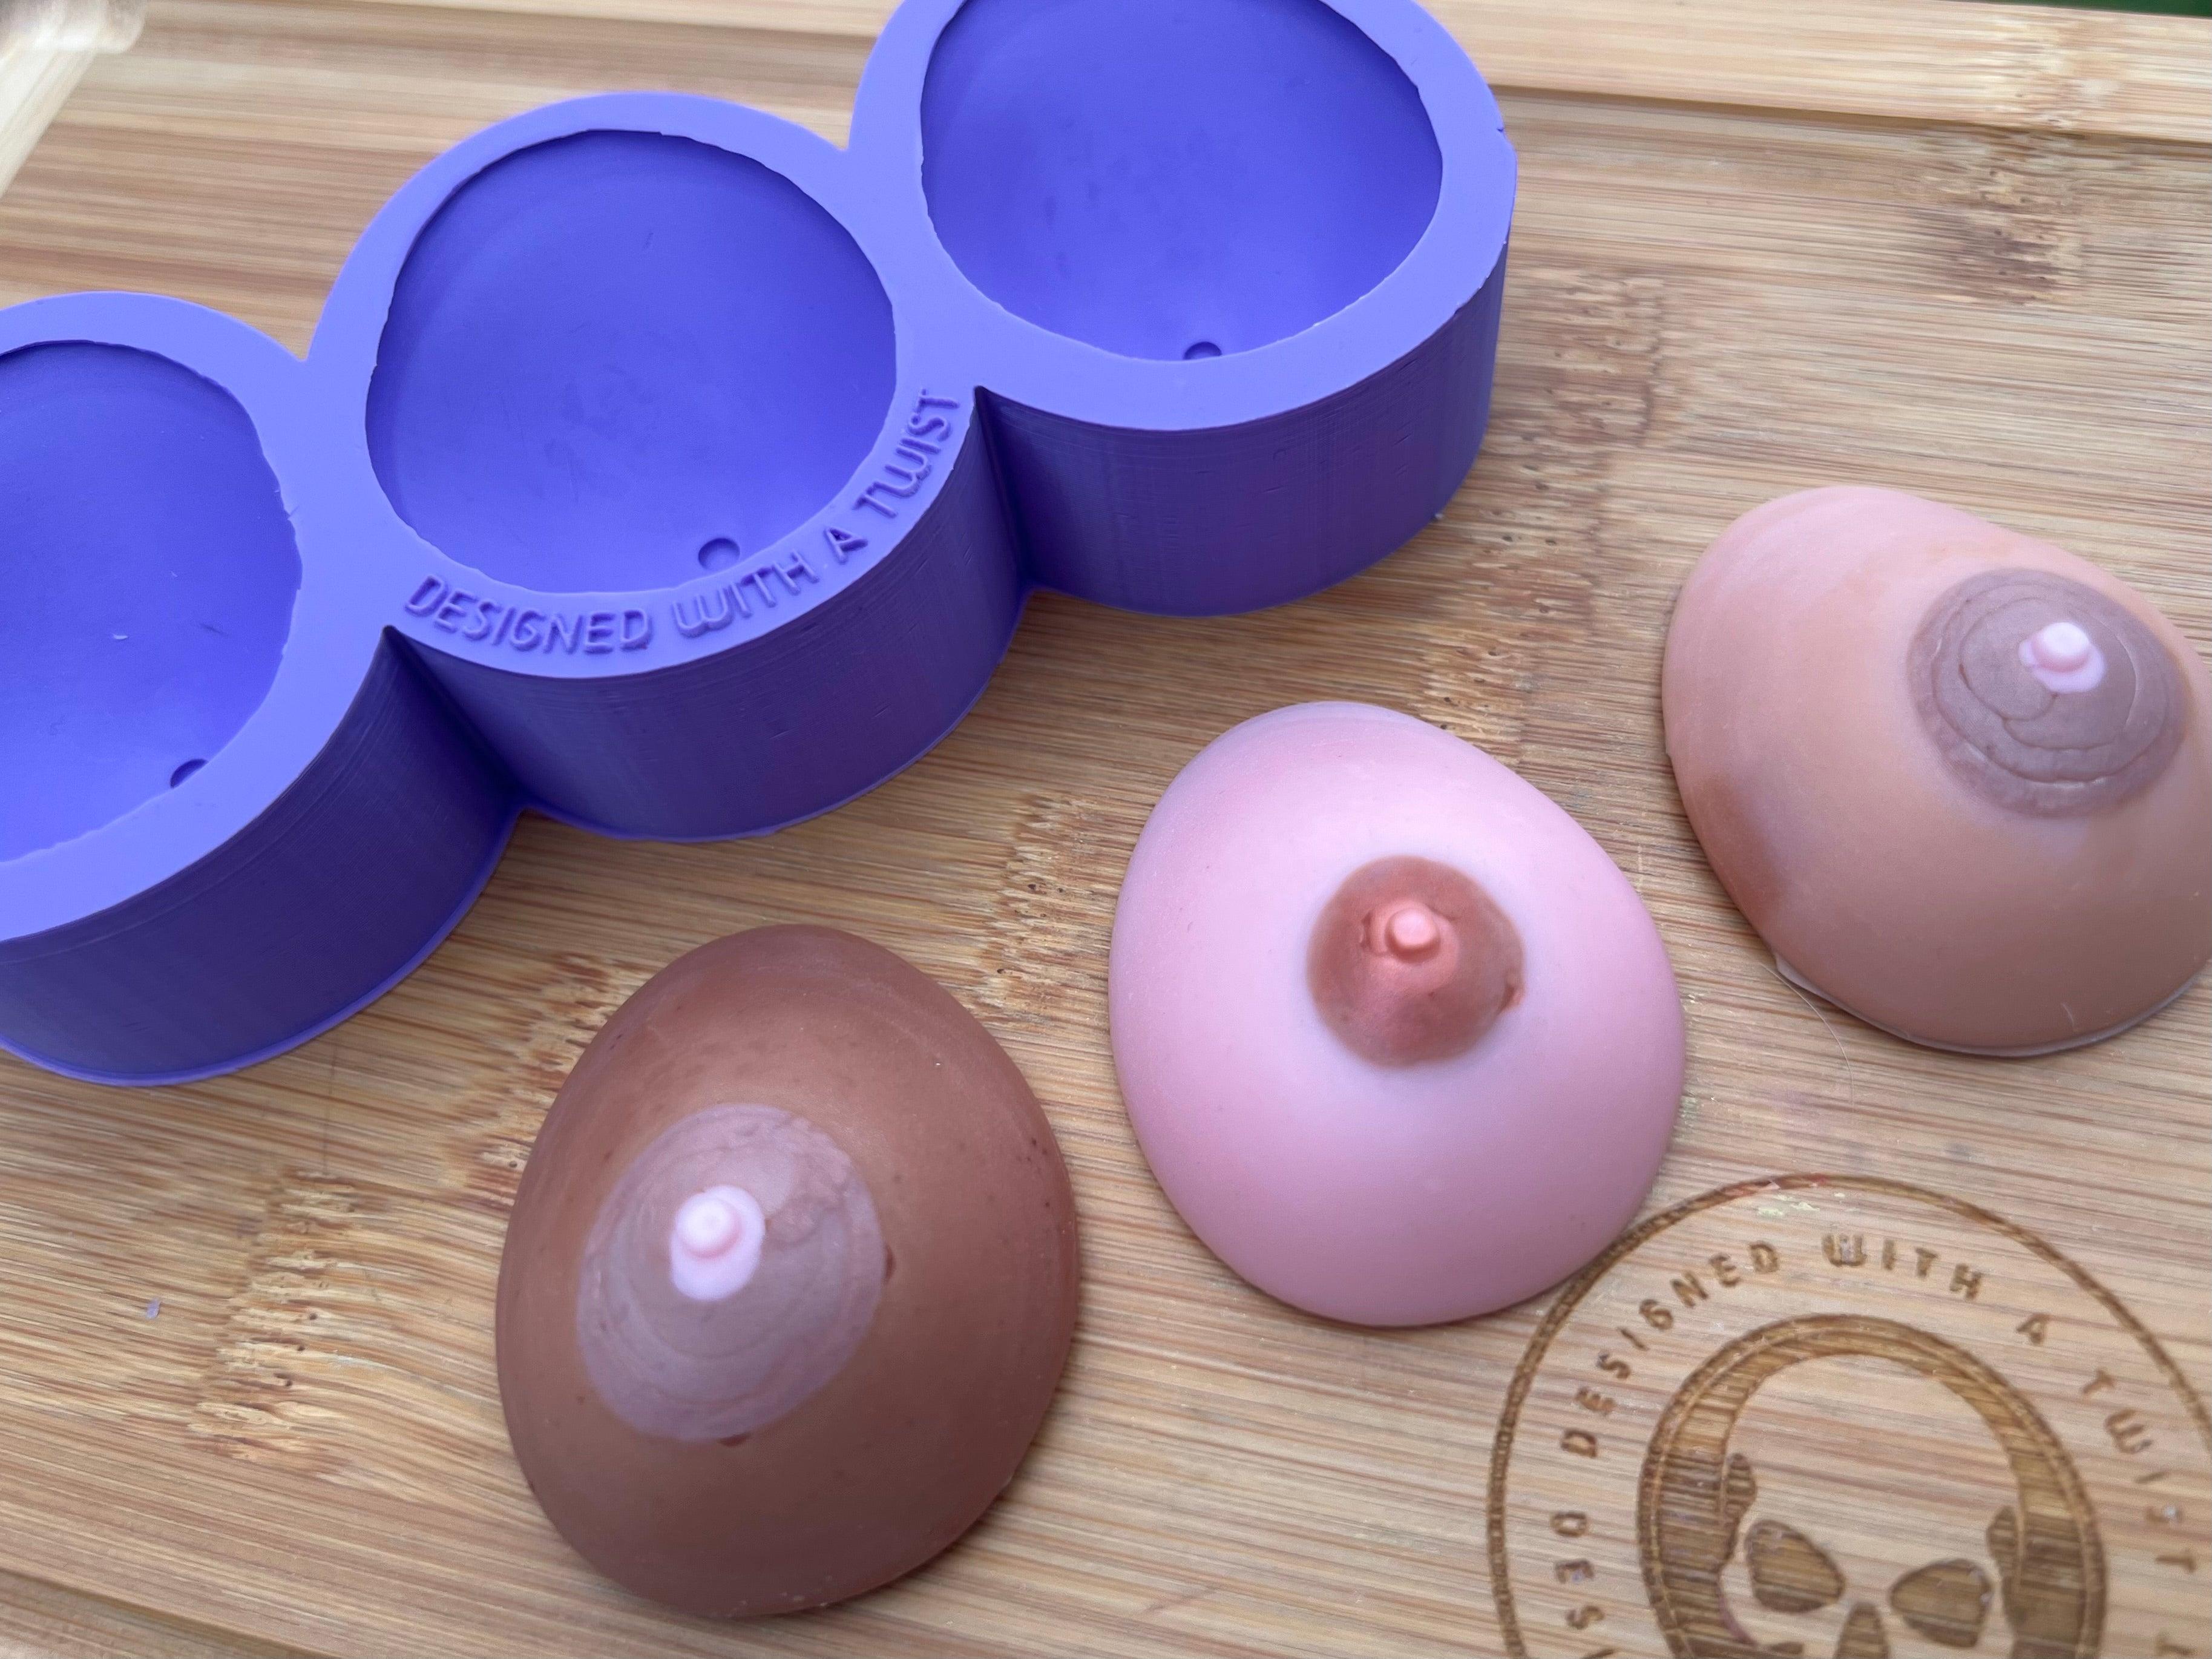 Boobie Wax Melt Silicone Mold - Designed with a Twist - Top quality silicone molds made in the UK.